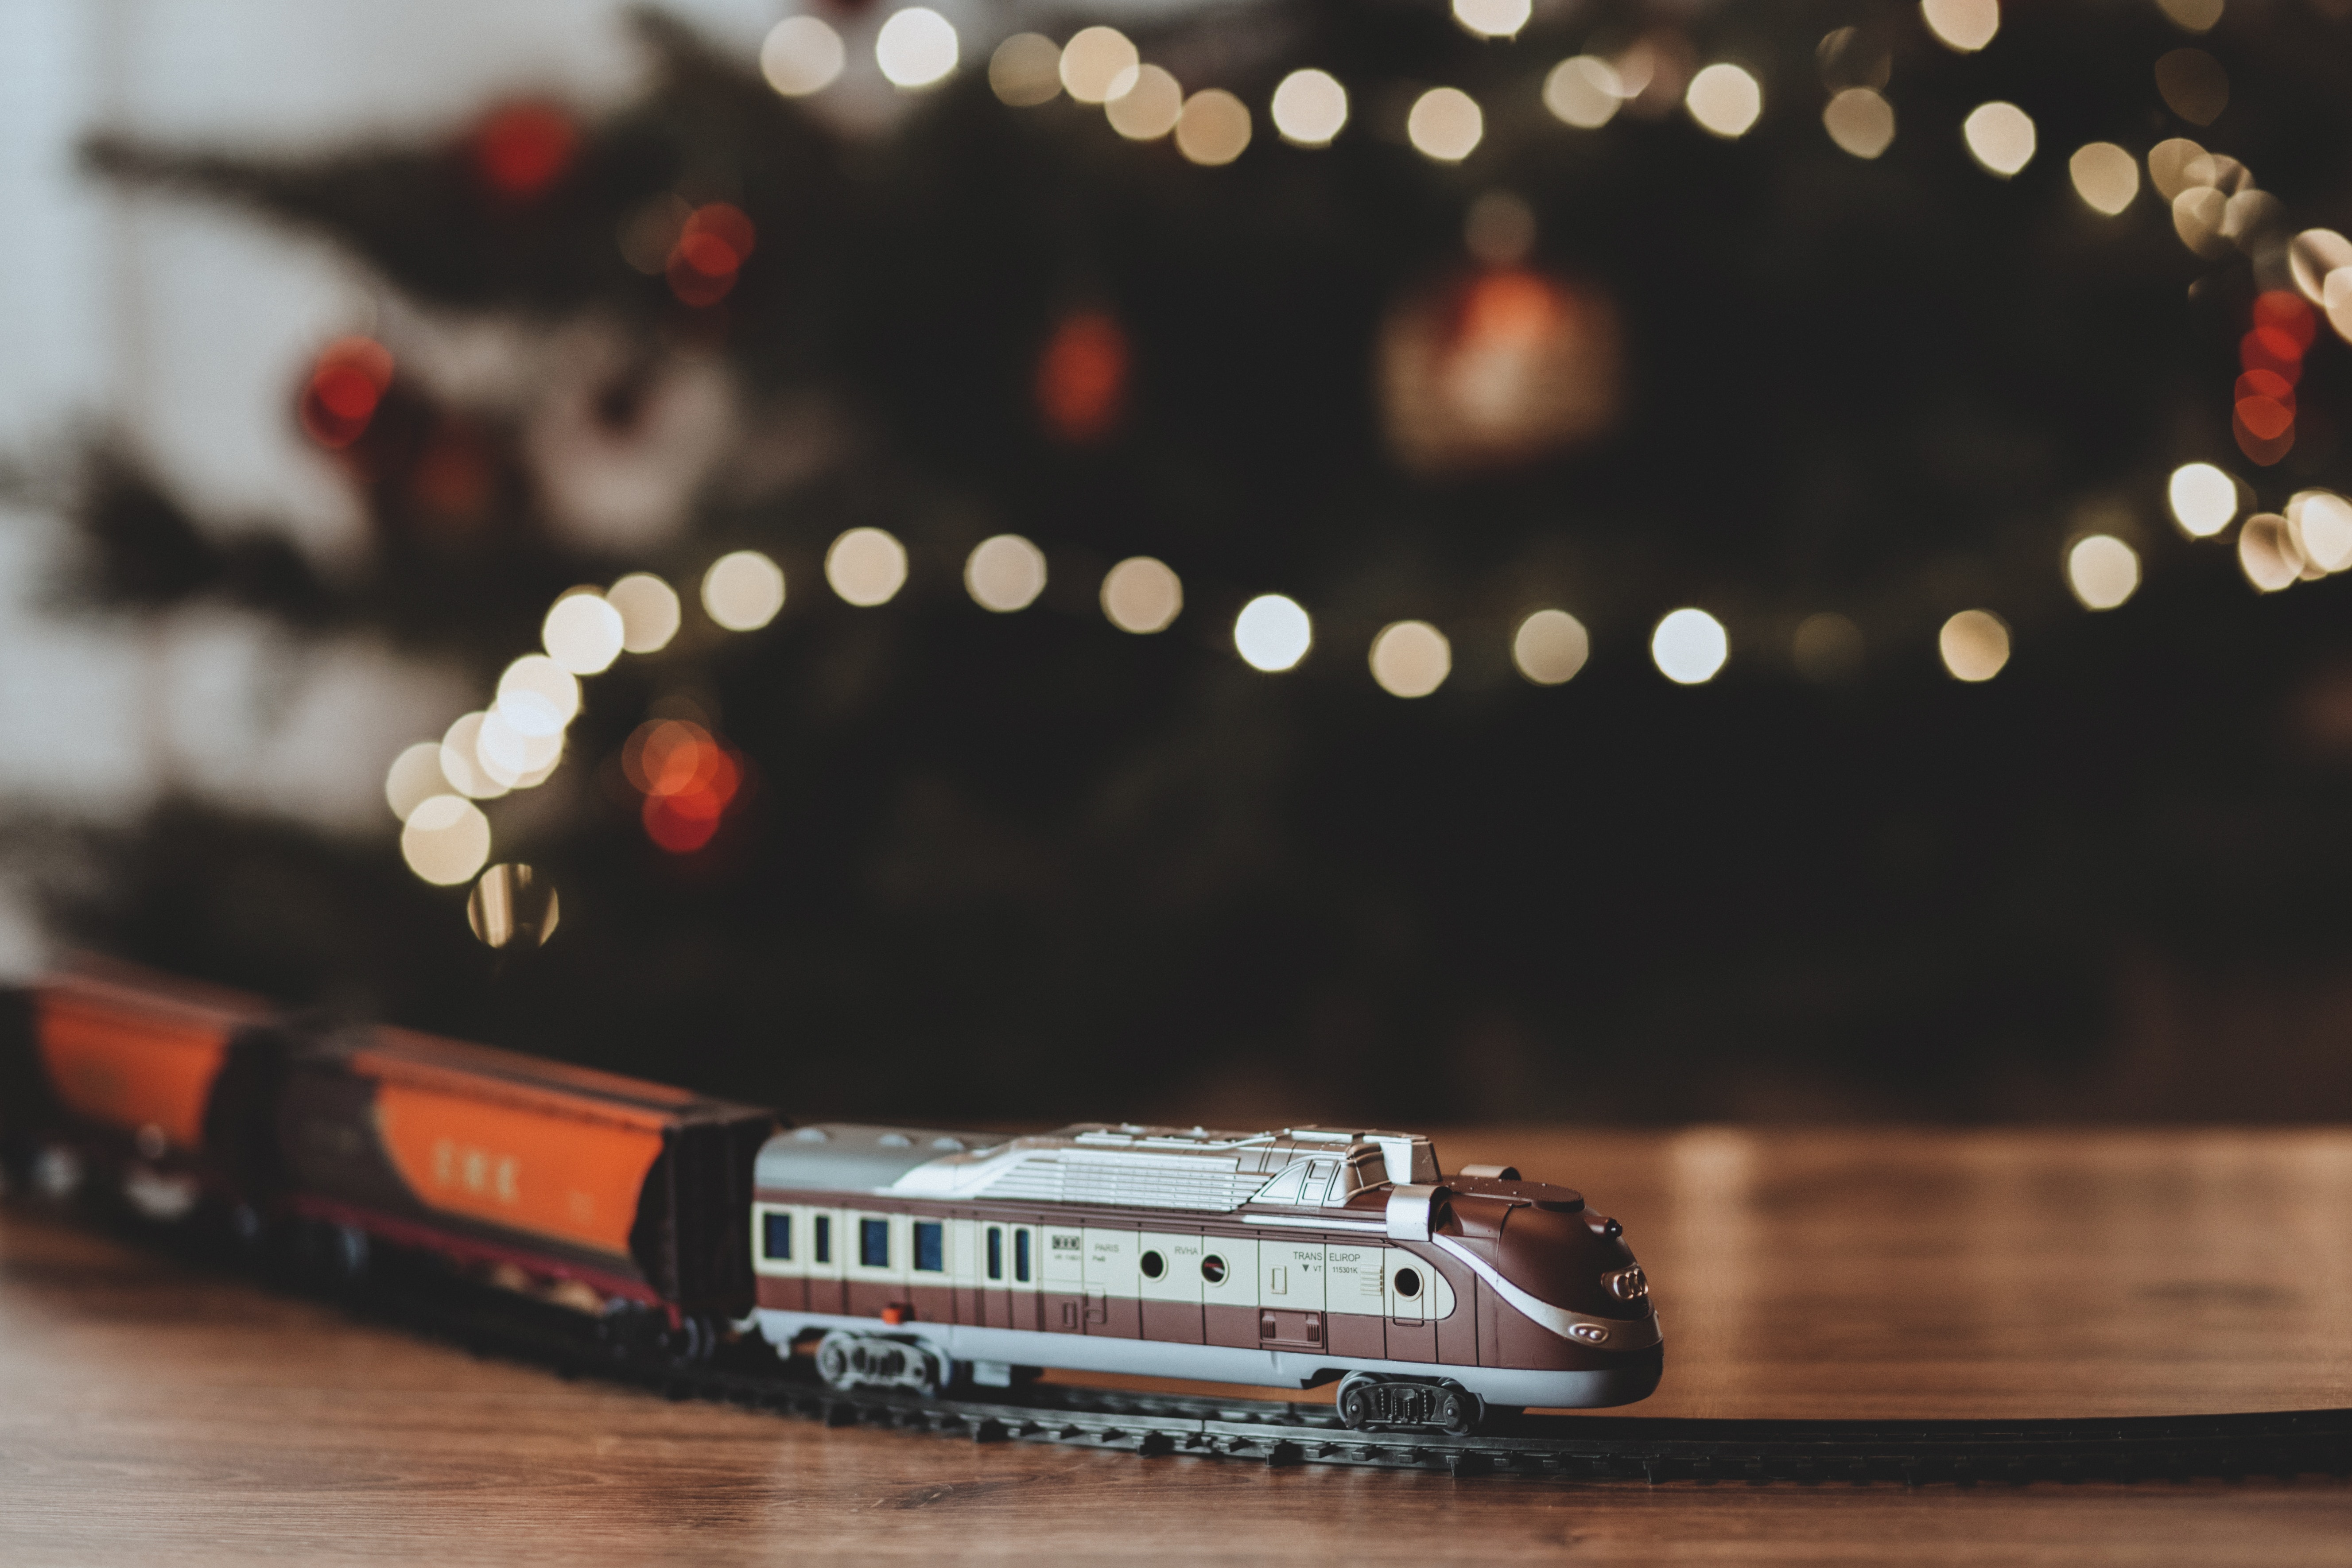 Shallow focus photography of a gray train plastic toy